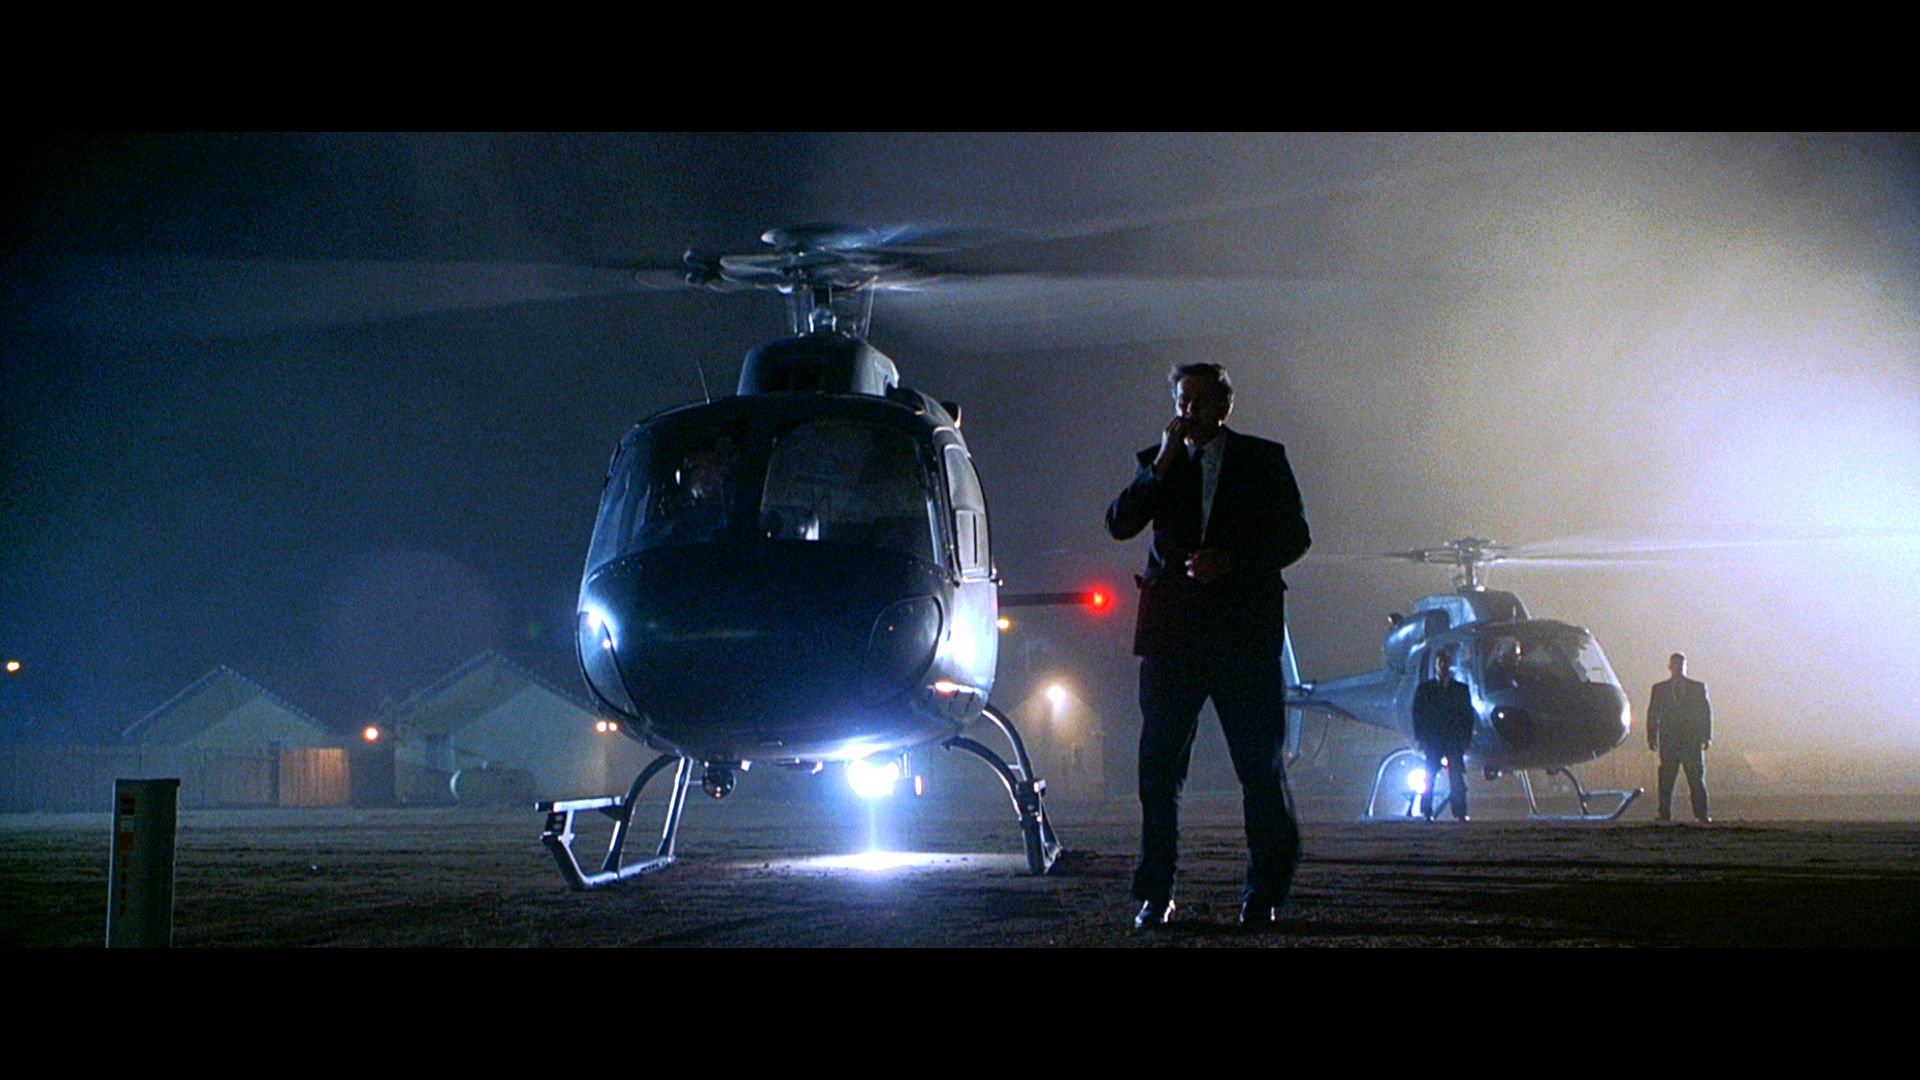 the, X files, Sci fi, Mystery, Drama, Television, Files, Series, Helicopter Wallpaper